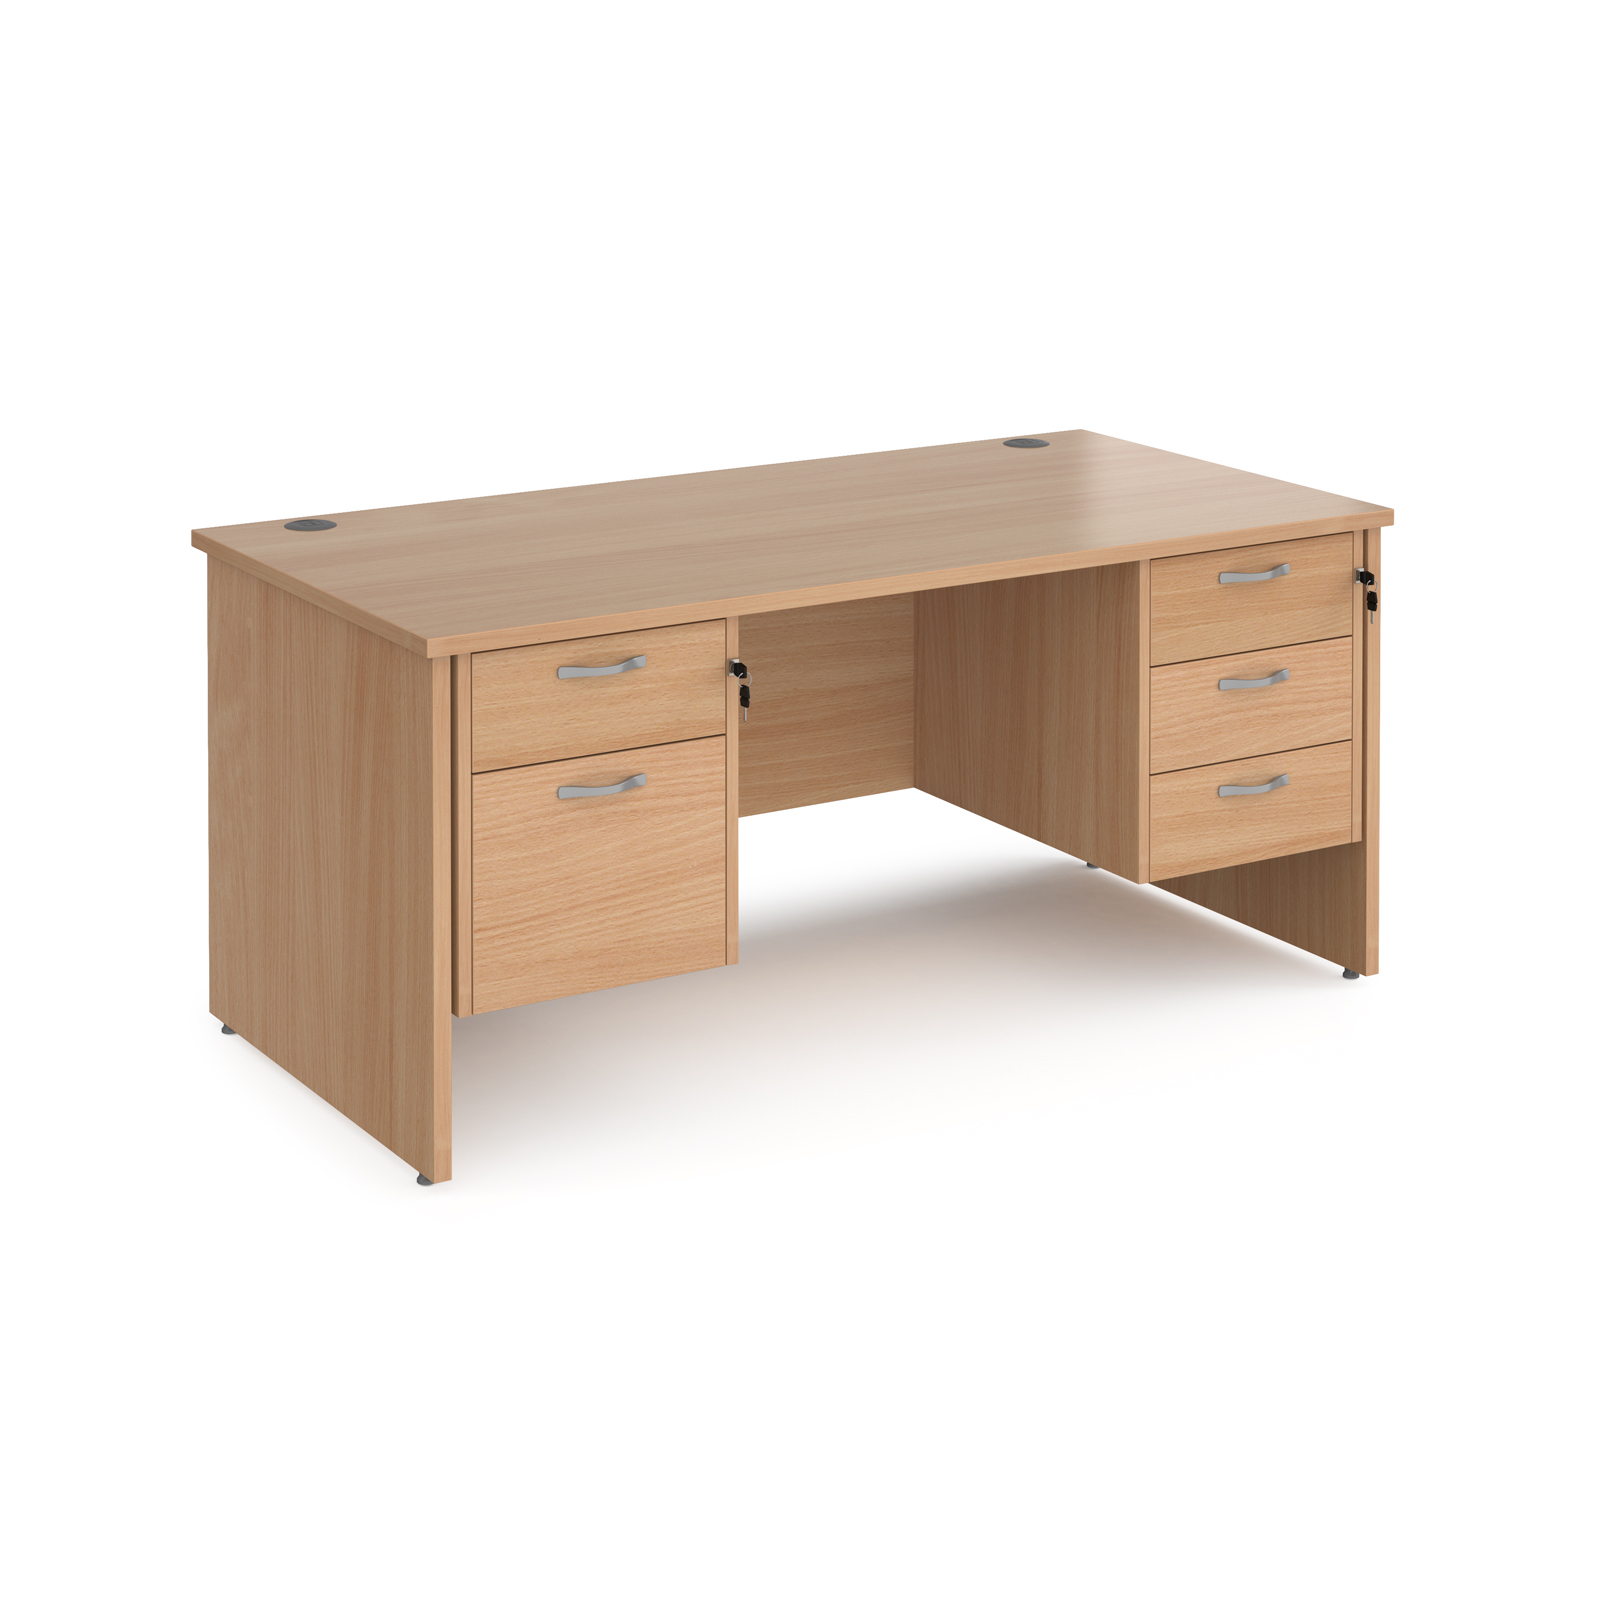 Maestro 25 straight desk 1600mm x 800mm with 2 and 3 drawer pedestals - beech top with panel end leg